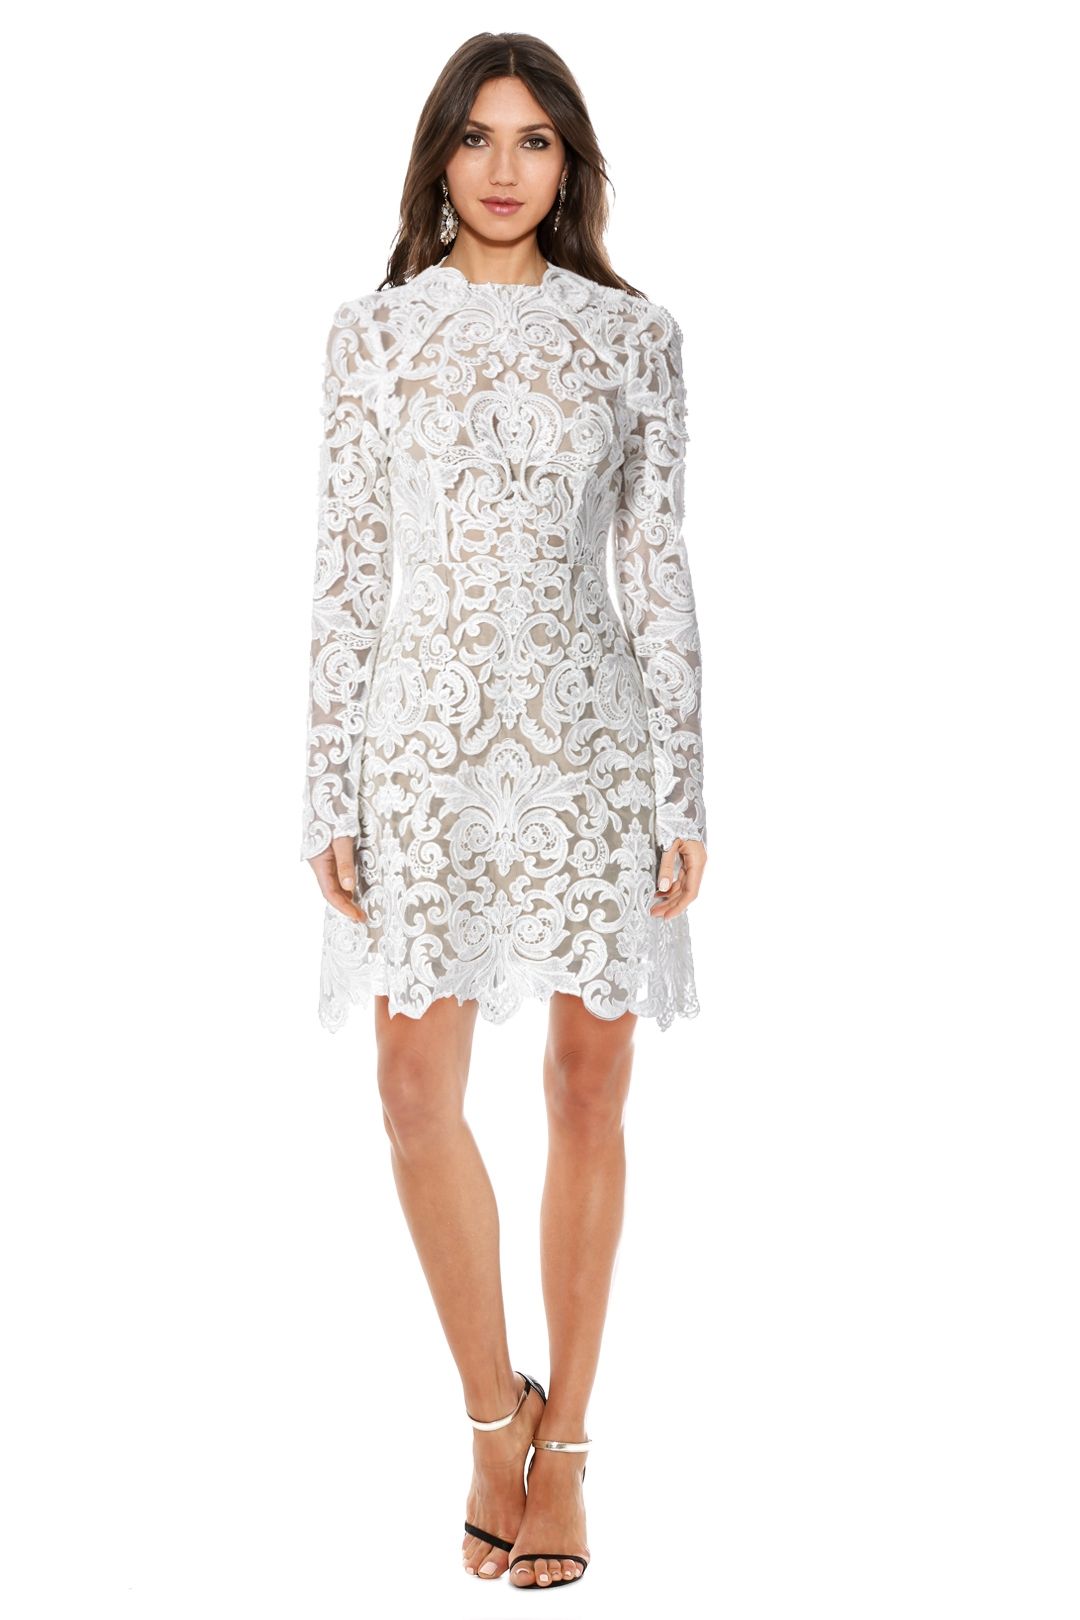 Thurley - Mother of Pearl Dress - White - Front